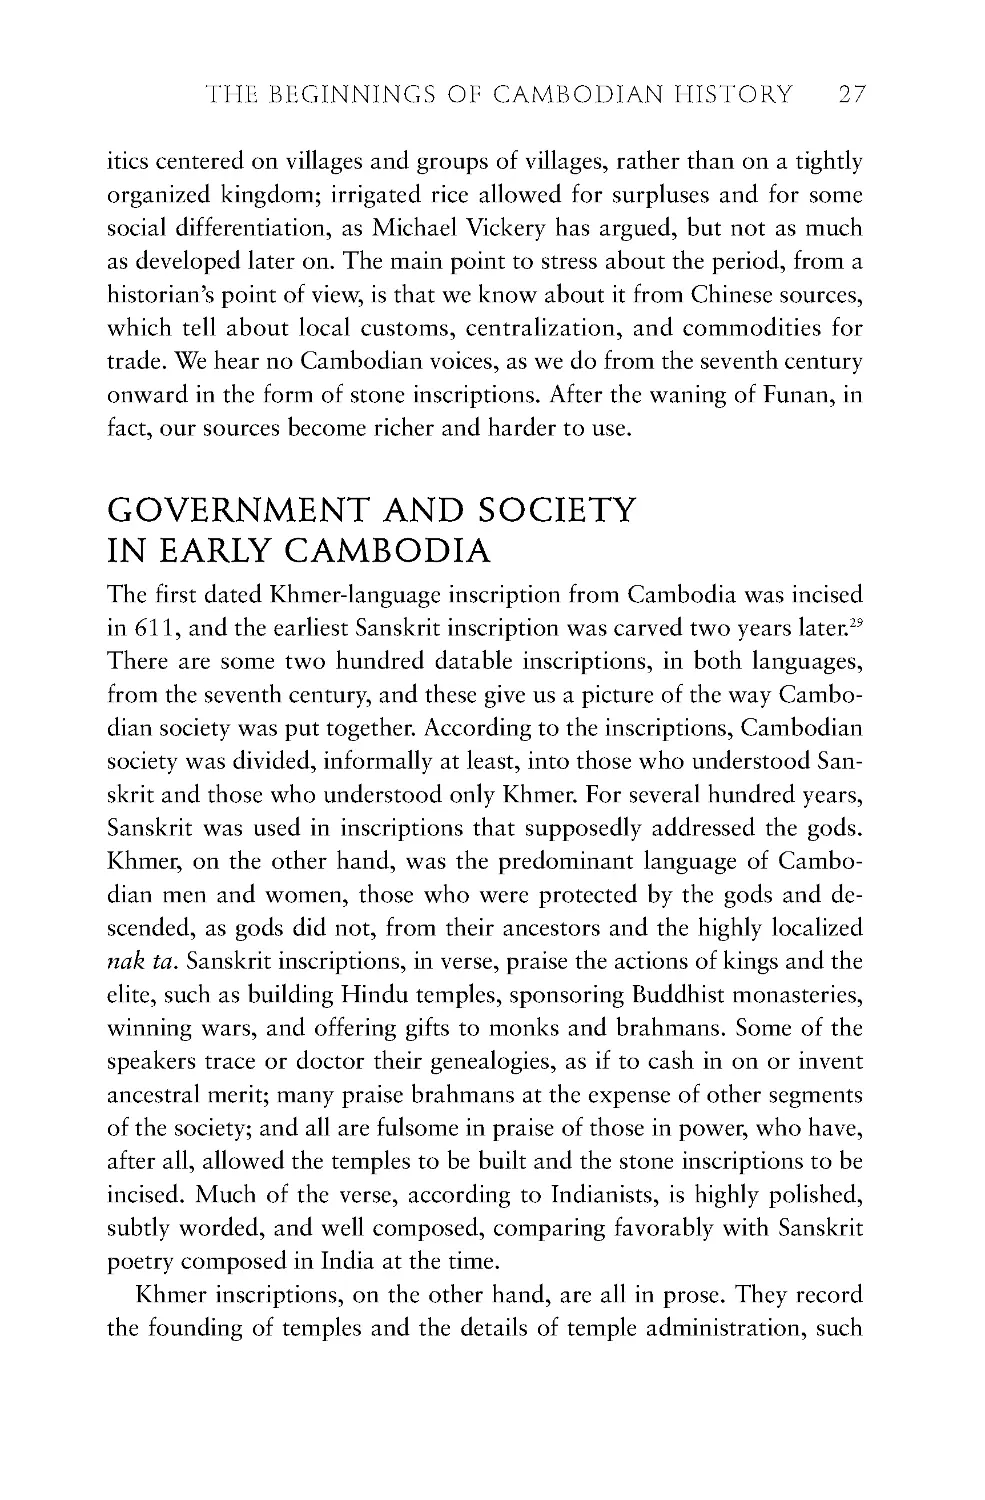 Government and Society in Early Cambodia